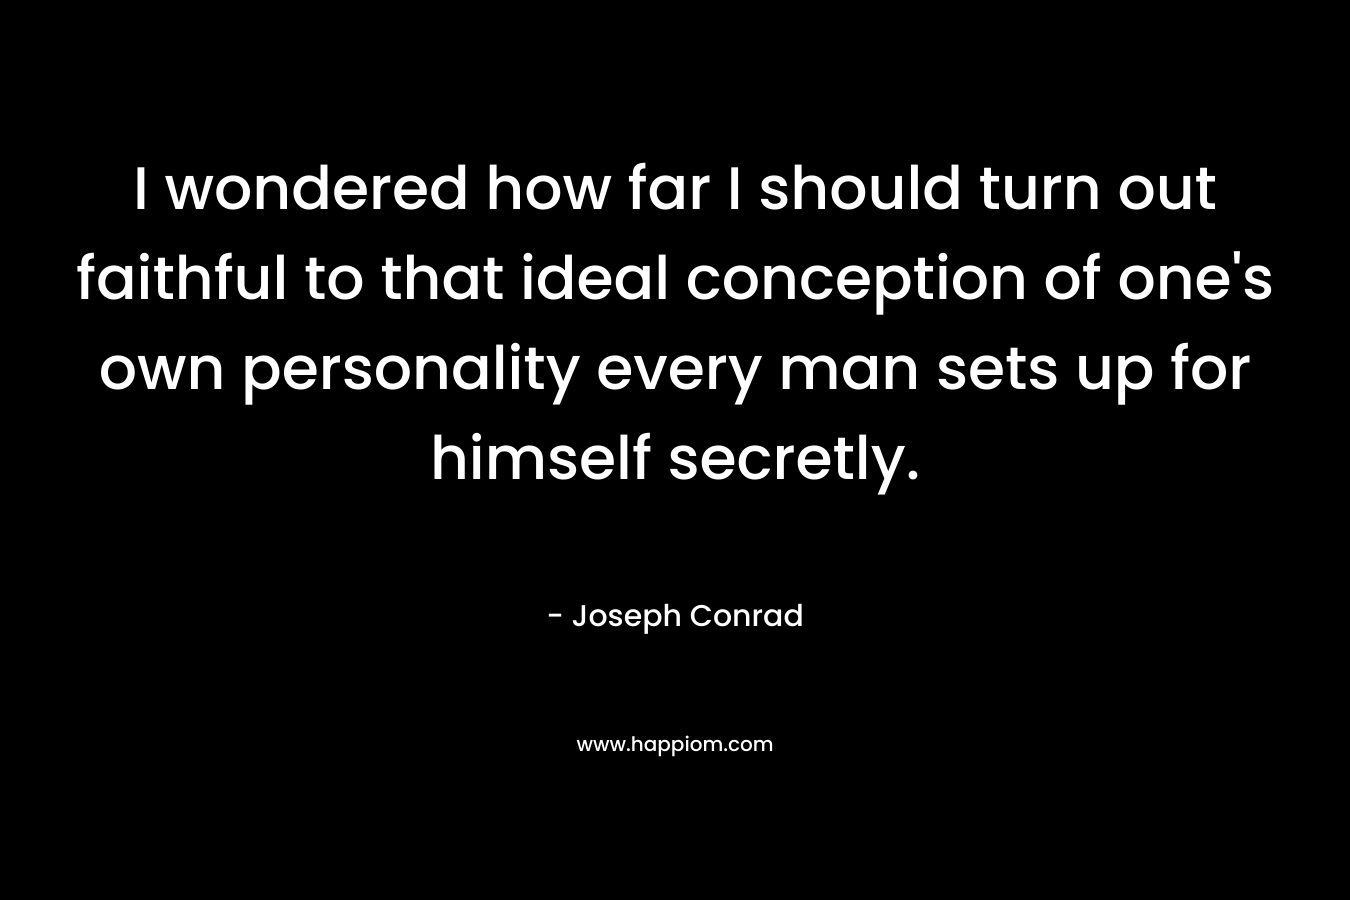 I wondered how far I should turn out faithful to that ideal conception of one’s own personality every man sets up for himself secretly. – Joseph Conrad